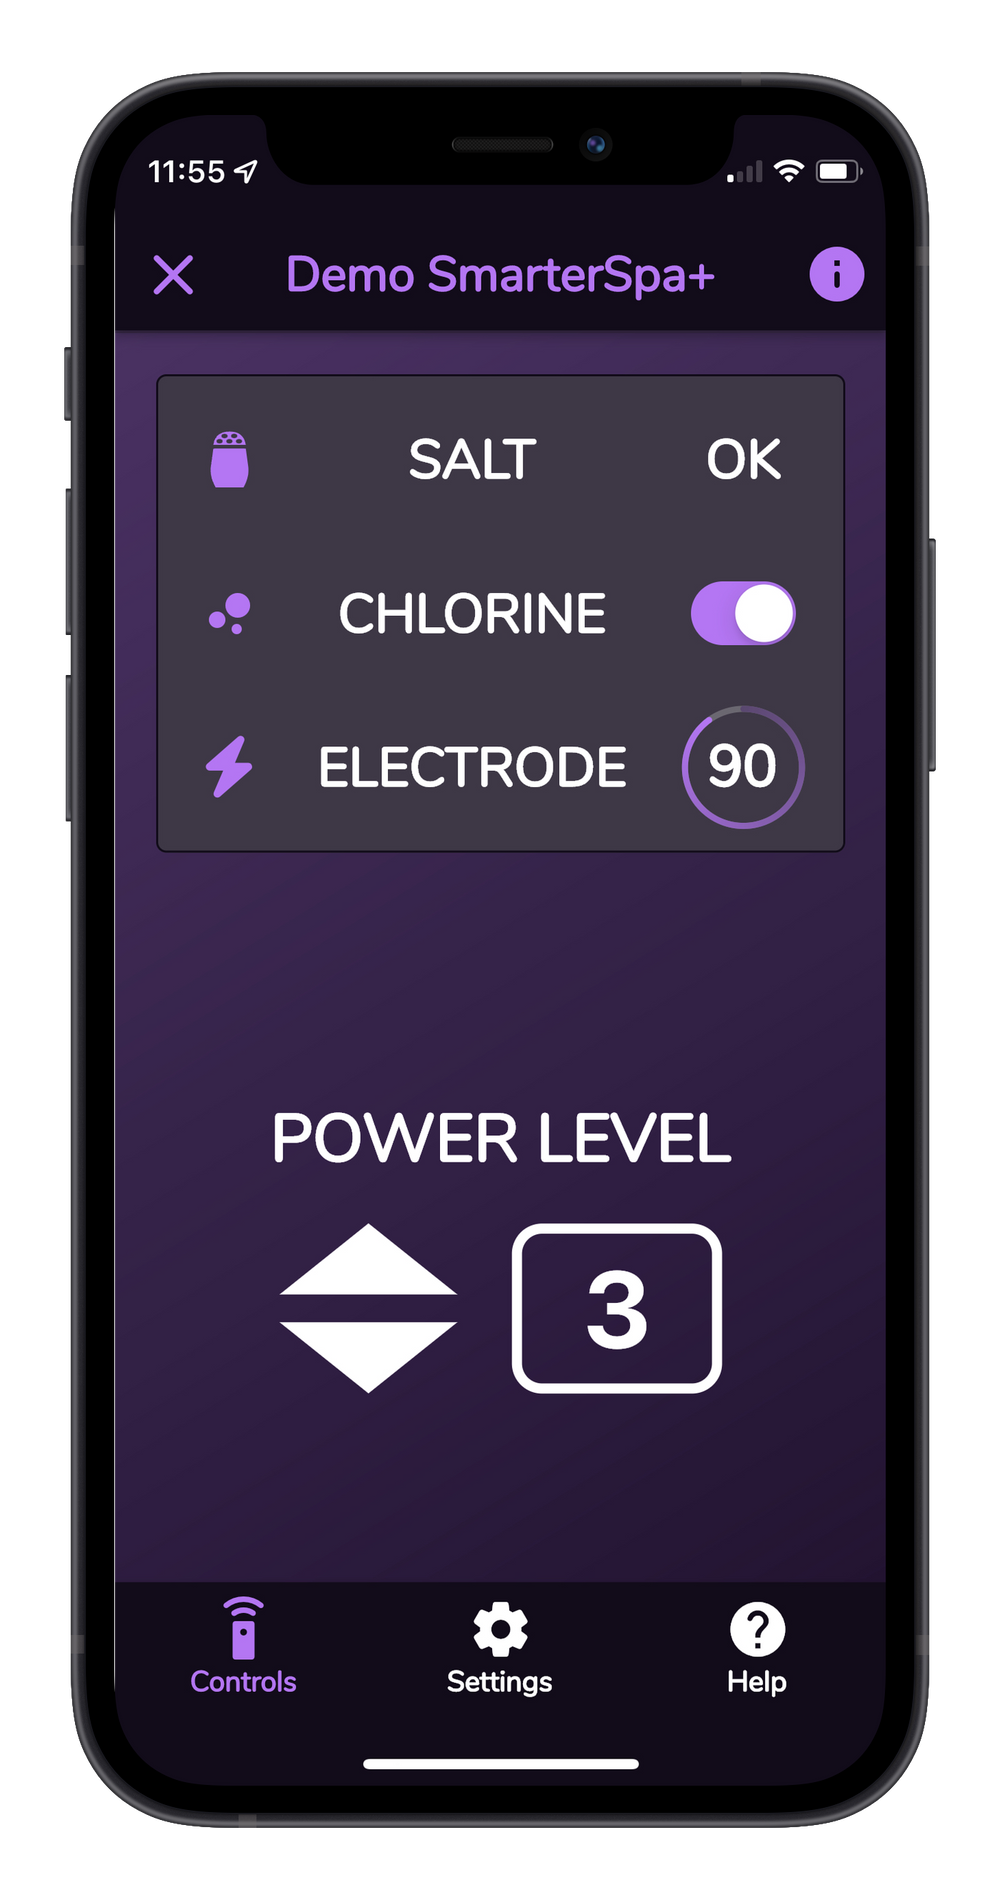 ControlOMatic SmarterSpa+ Saltwater Chlorine Generation System with Built-in Smart Chlorine Detection Plus APP New